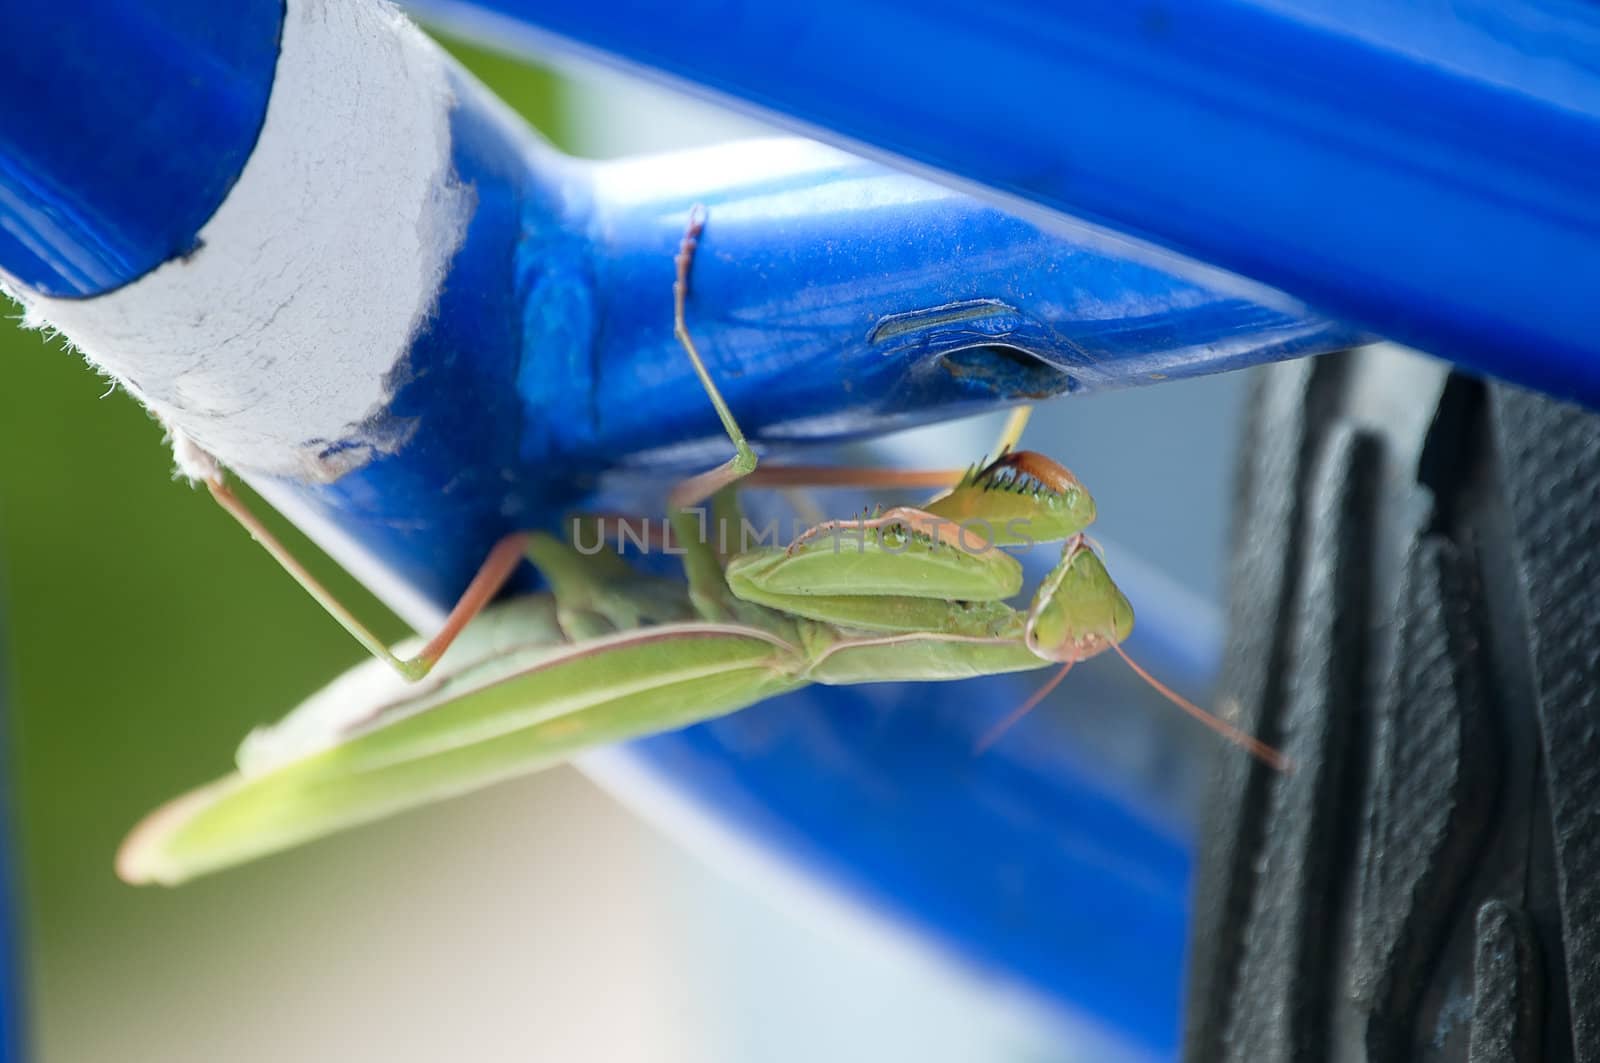 Praying Mantis hiding on the underside of a bicycle after laying its eggs.